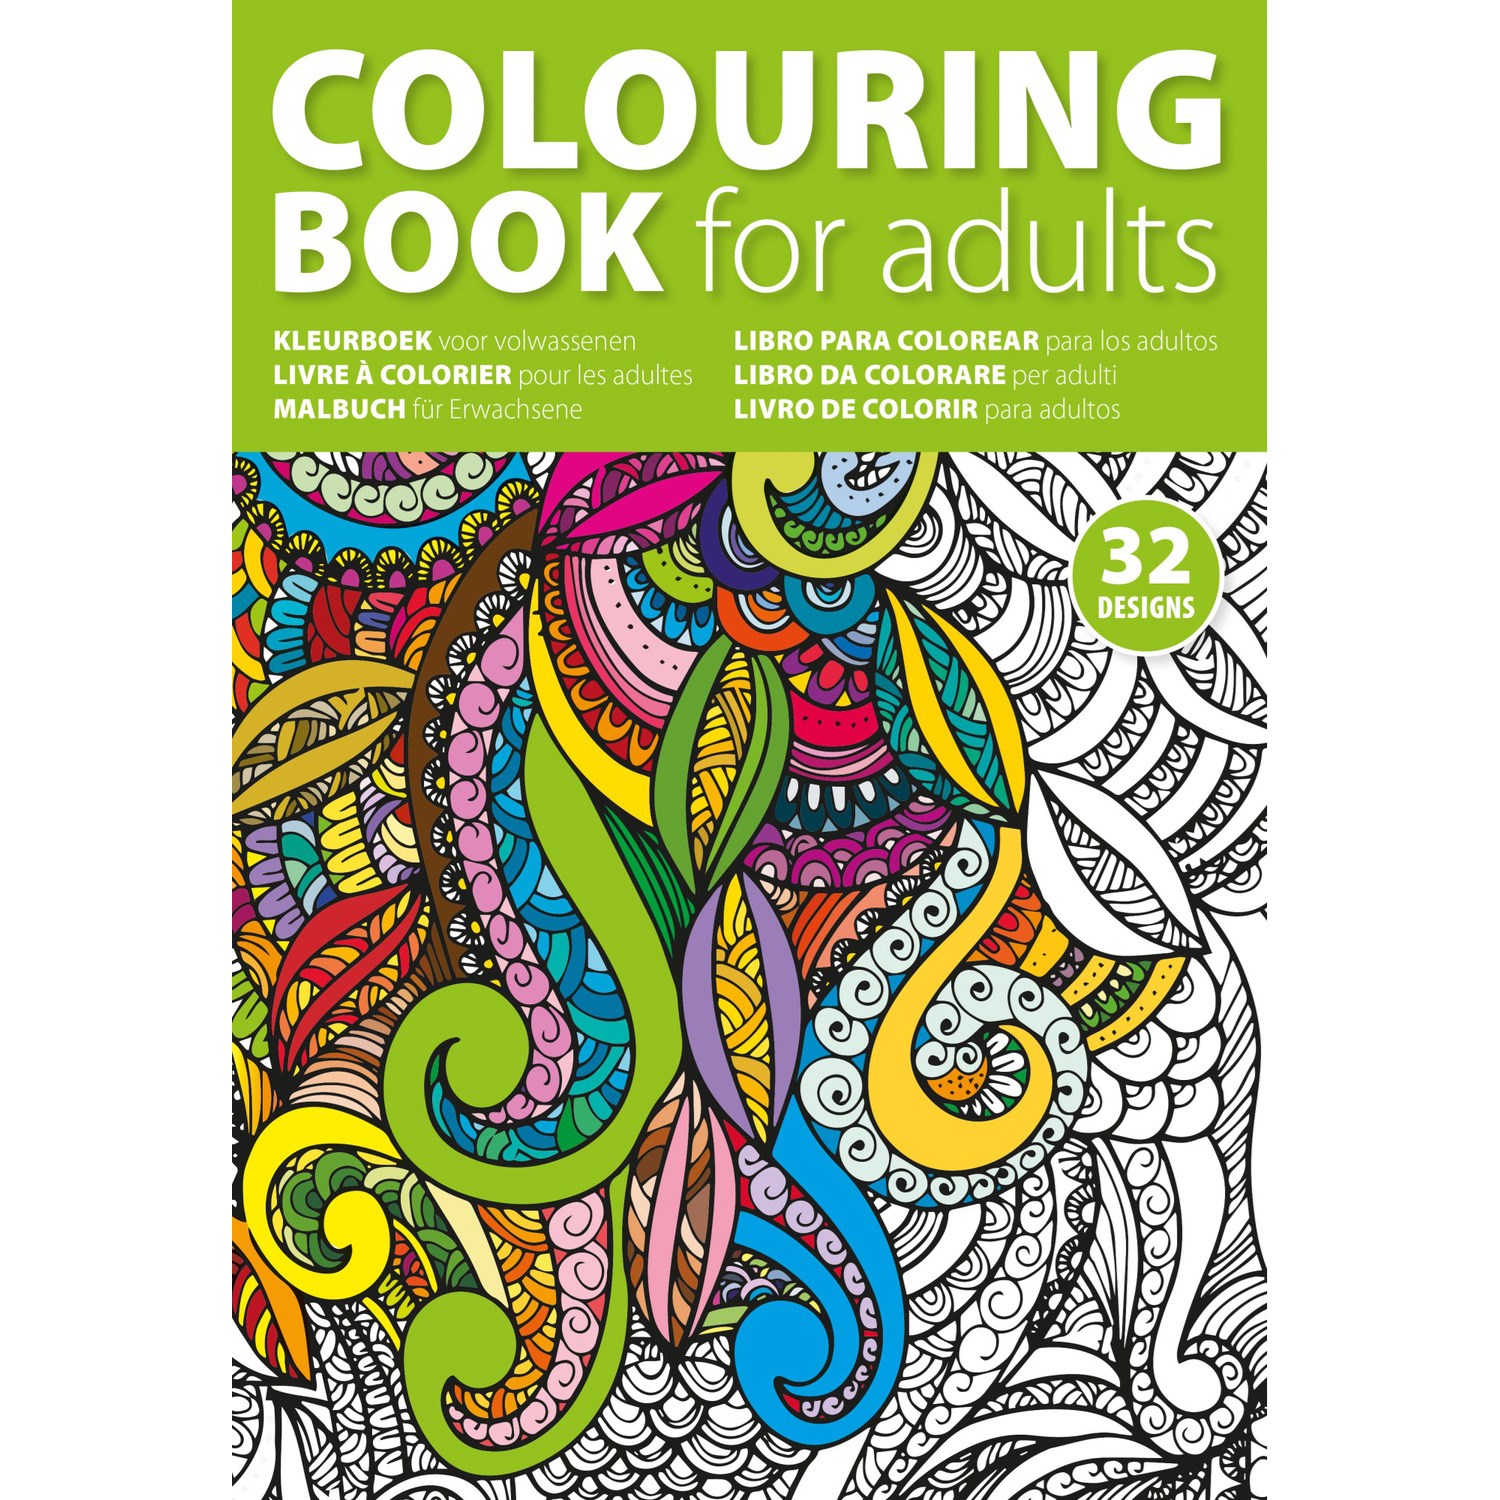 Coloring book 1 20 Unexpected and Creative Gift Ideas for Best Friends - 12